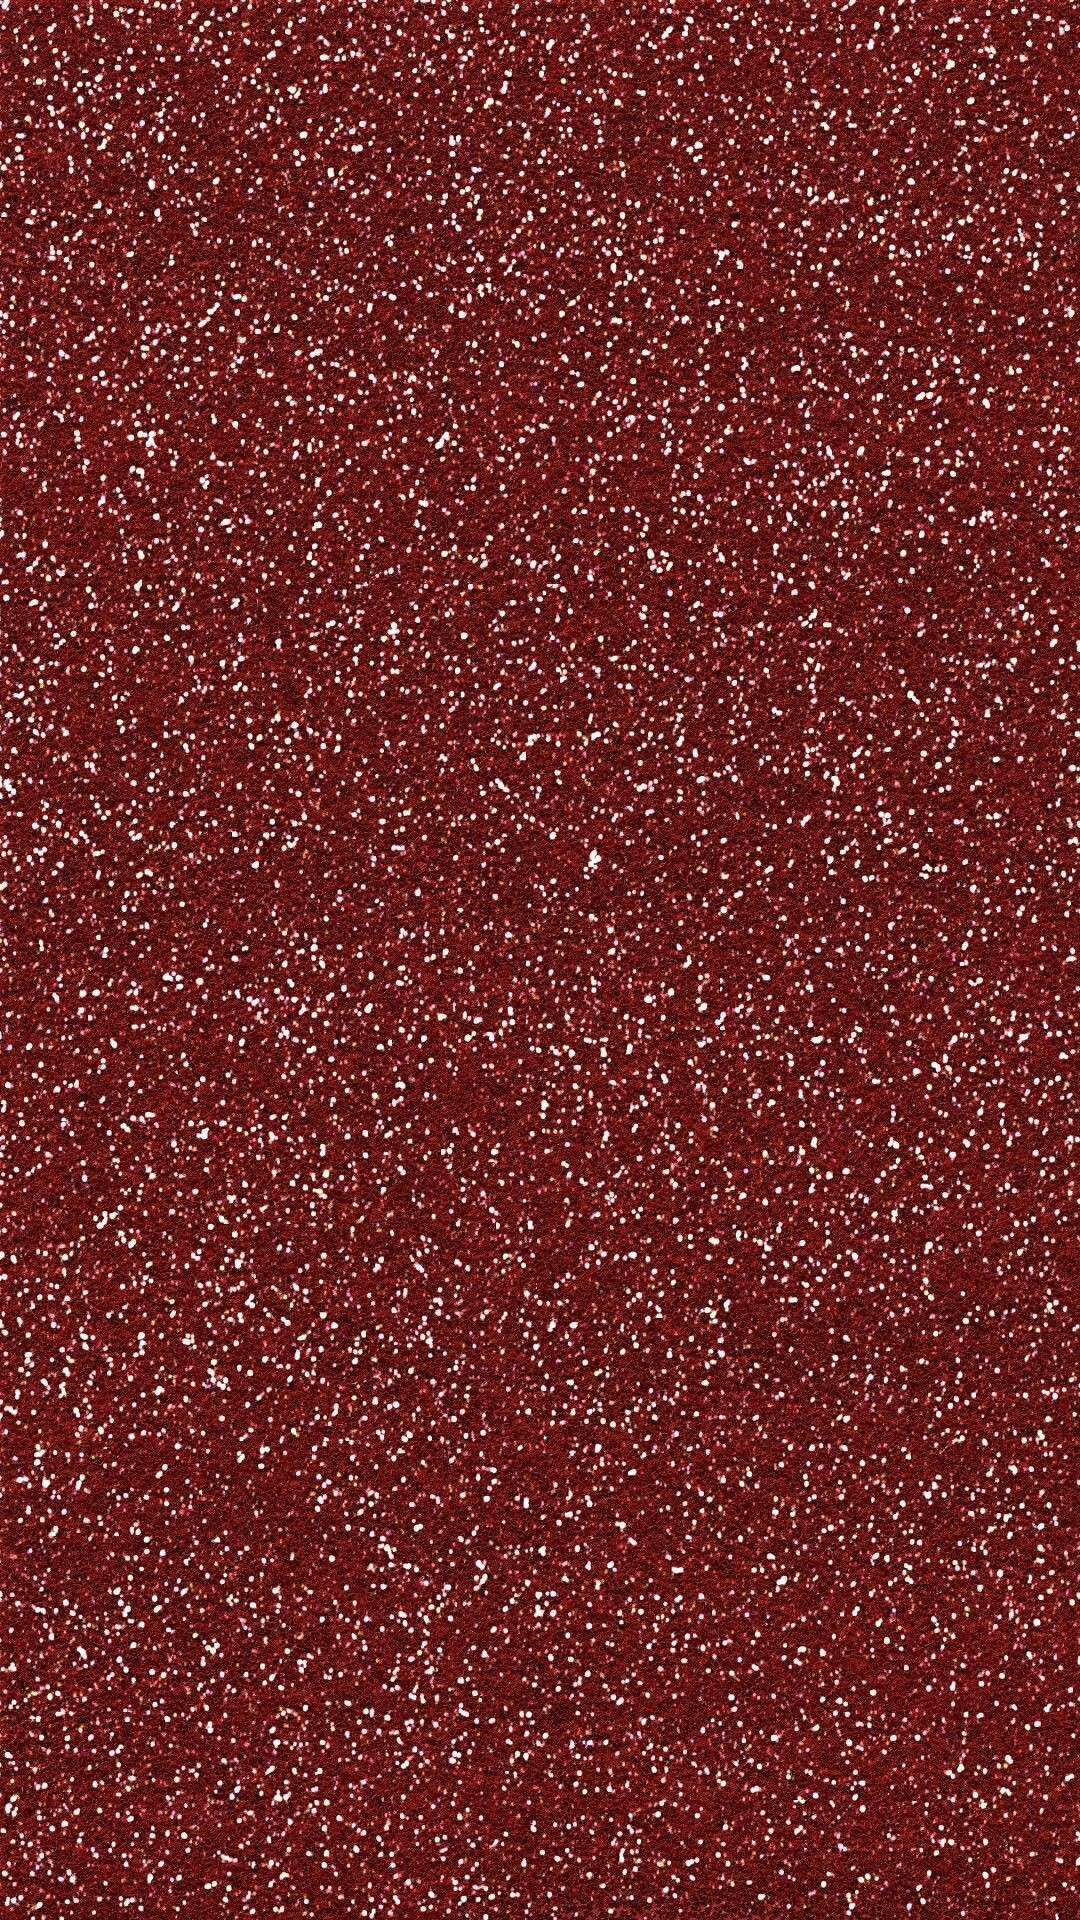 1080x1920 Cool wallpaper backgrounds iphone also awesome red glitter background  texture sparkle shiny gilttery paper rh pinterest